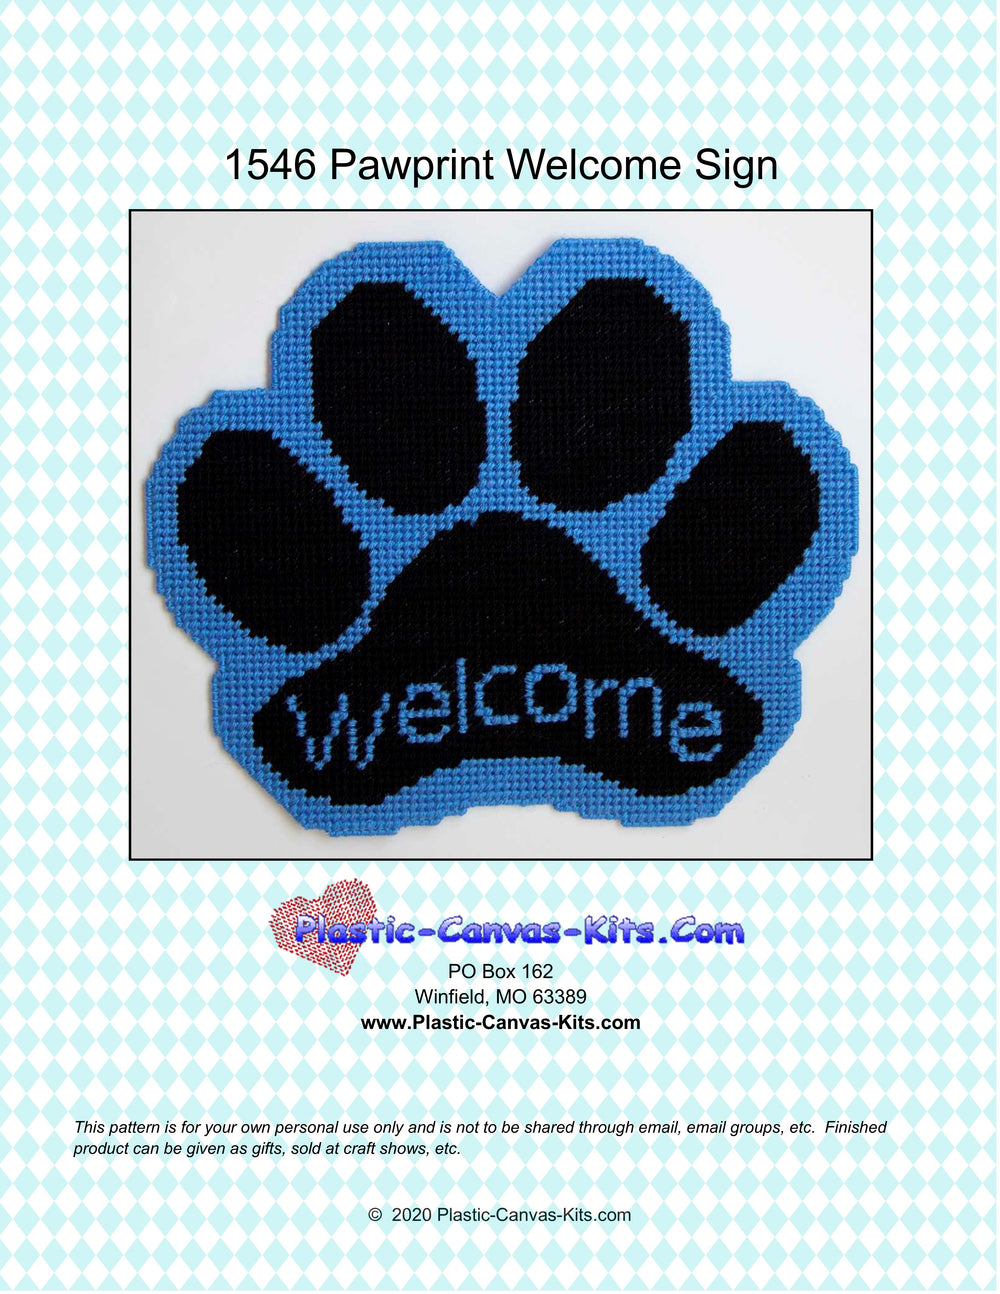 Pawprint Welcome Sign